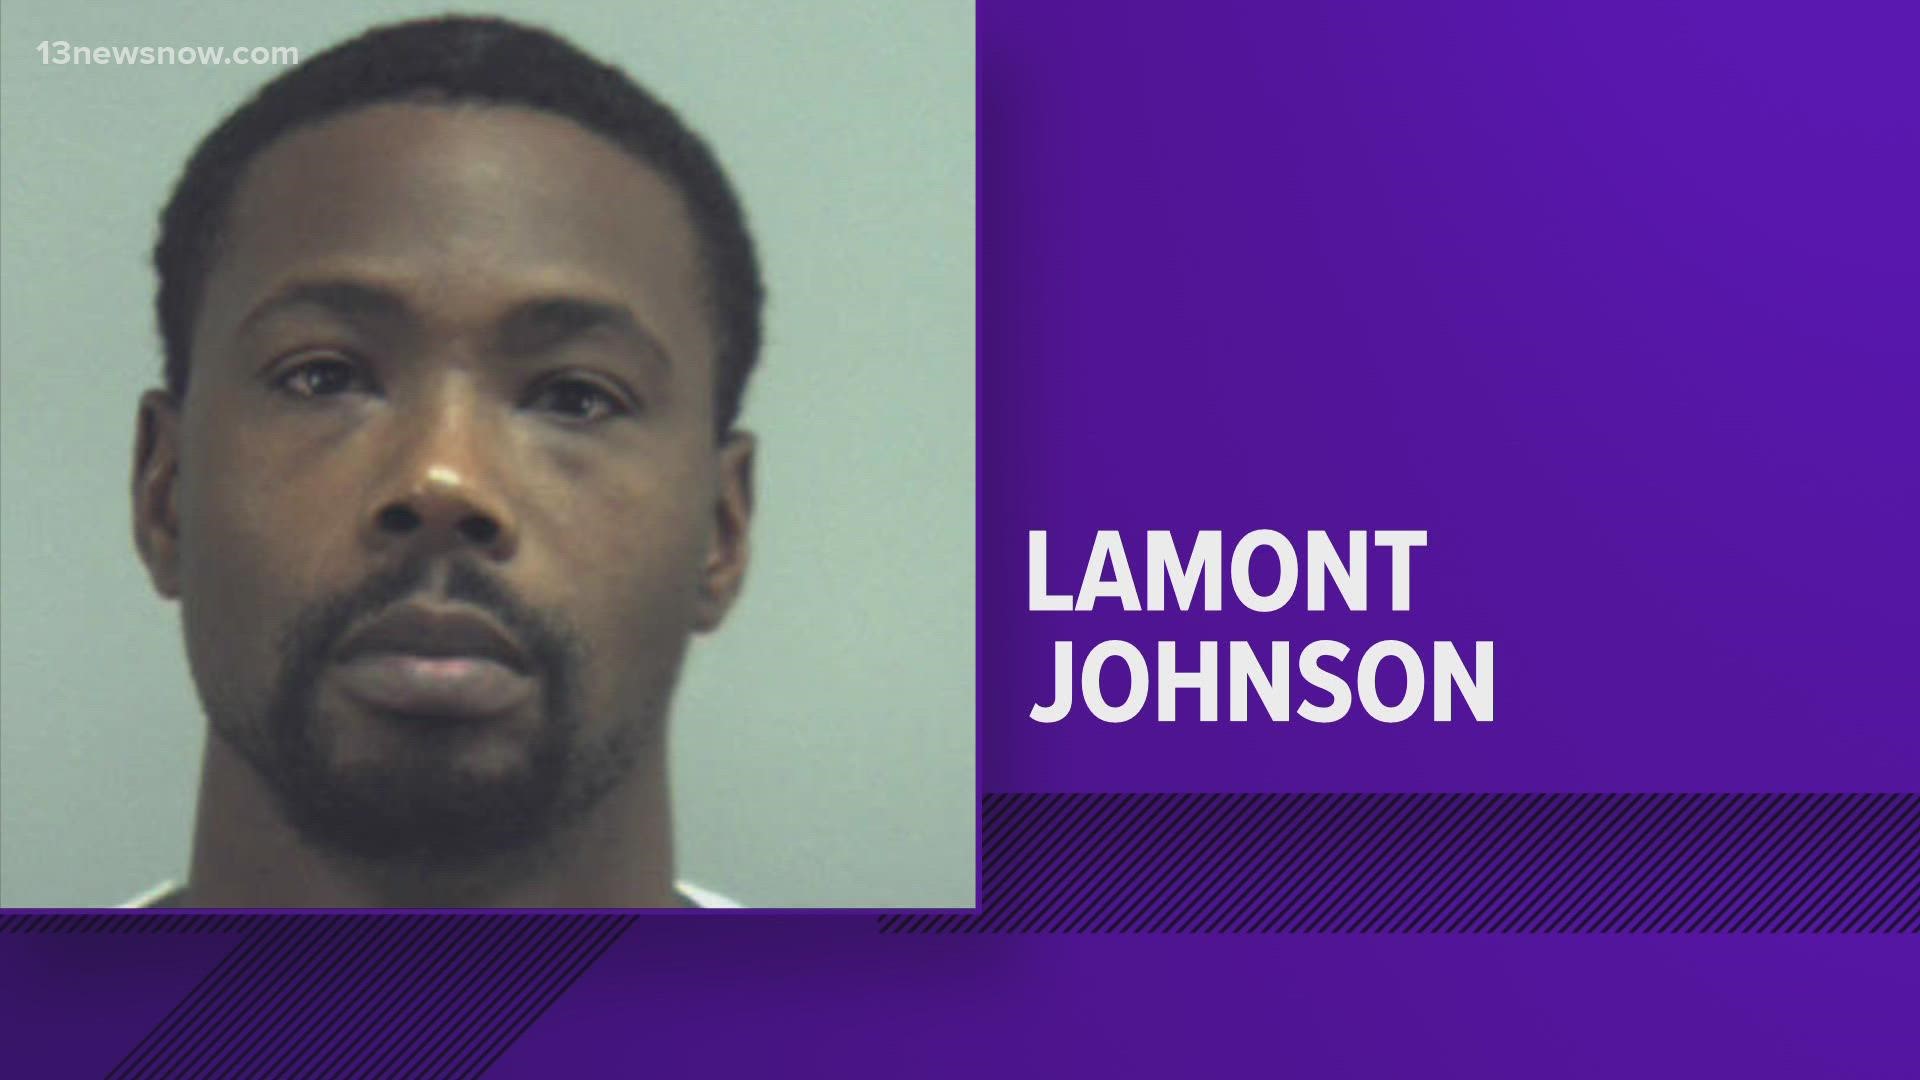 Lamont Johnson had confessed to killing his partner and the mother of his twins, Bellamy Gamboa, back in 2018.